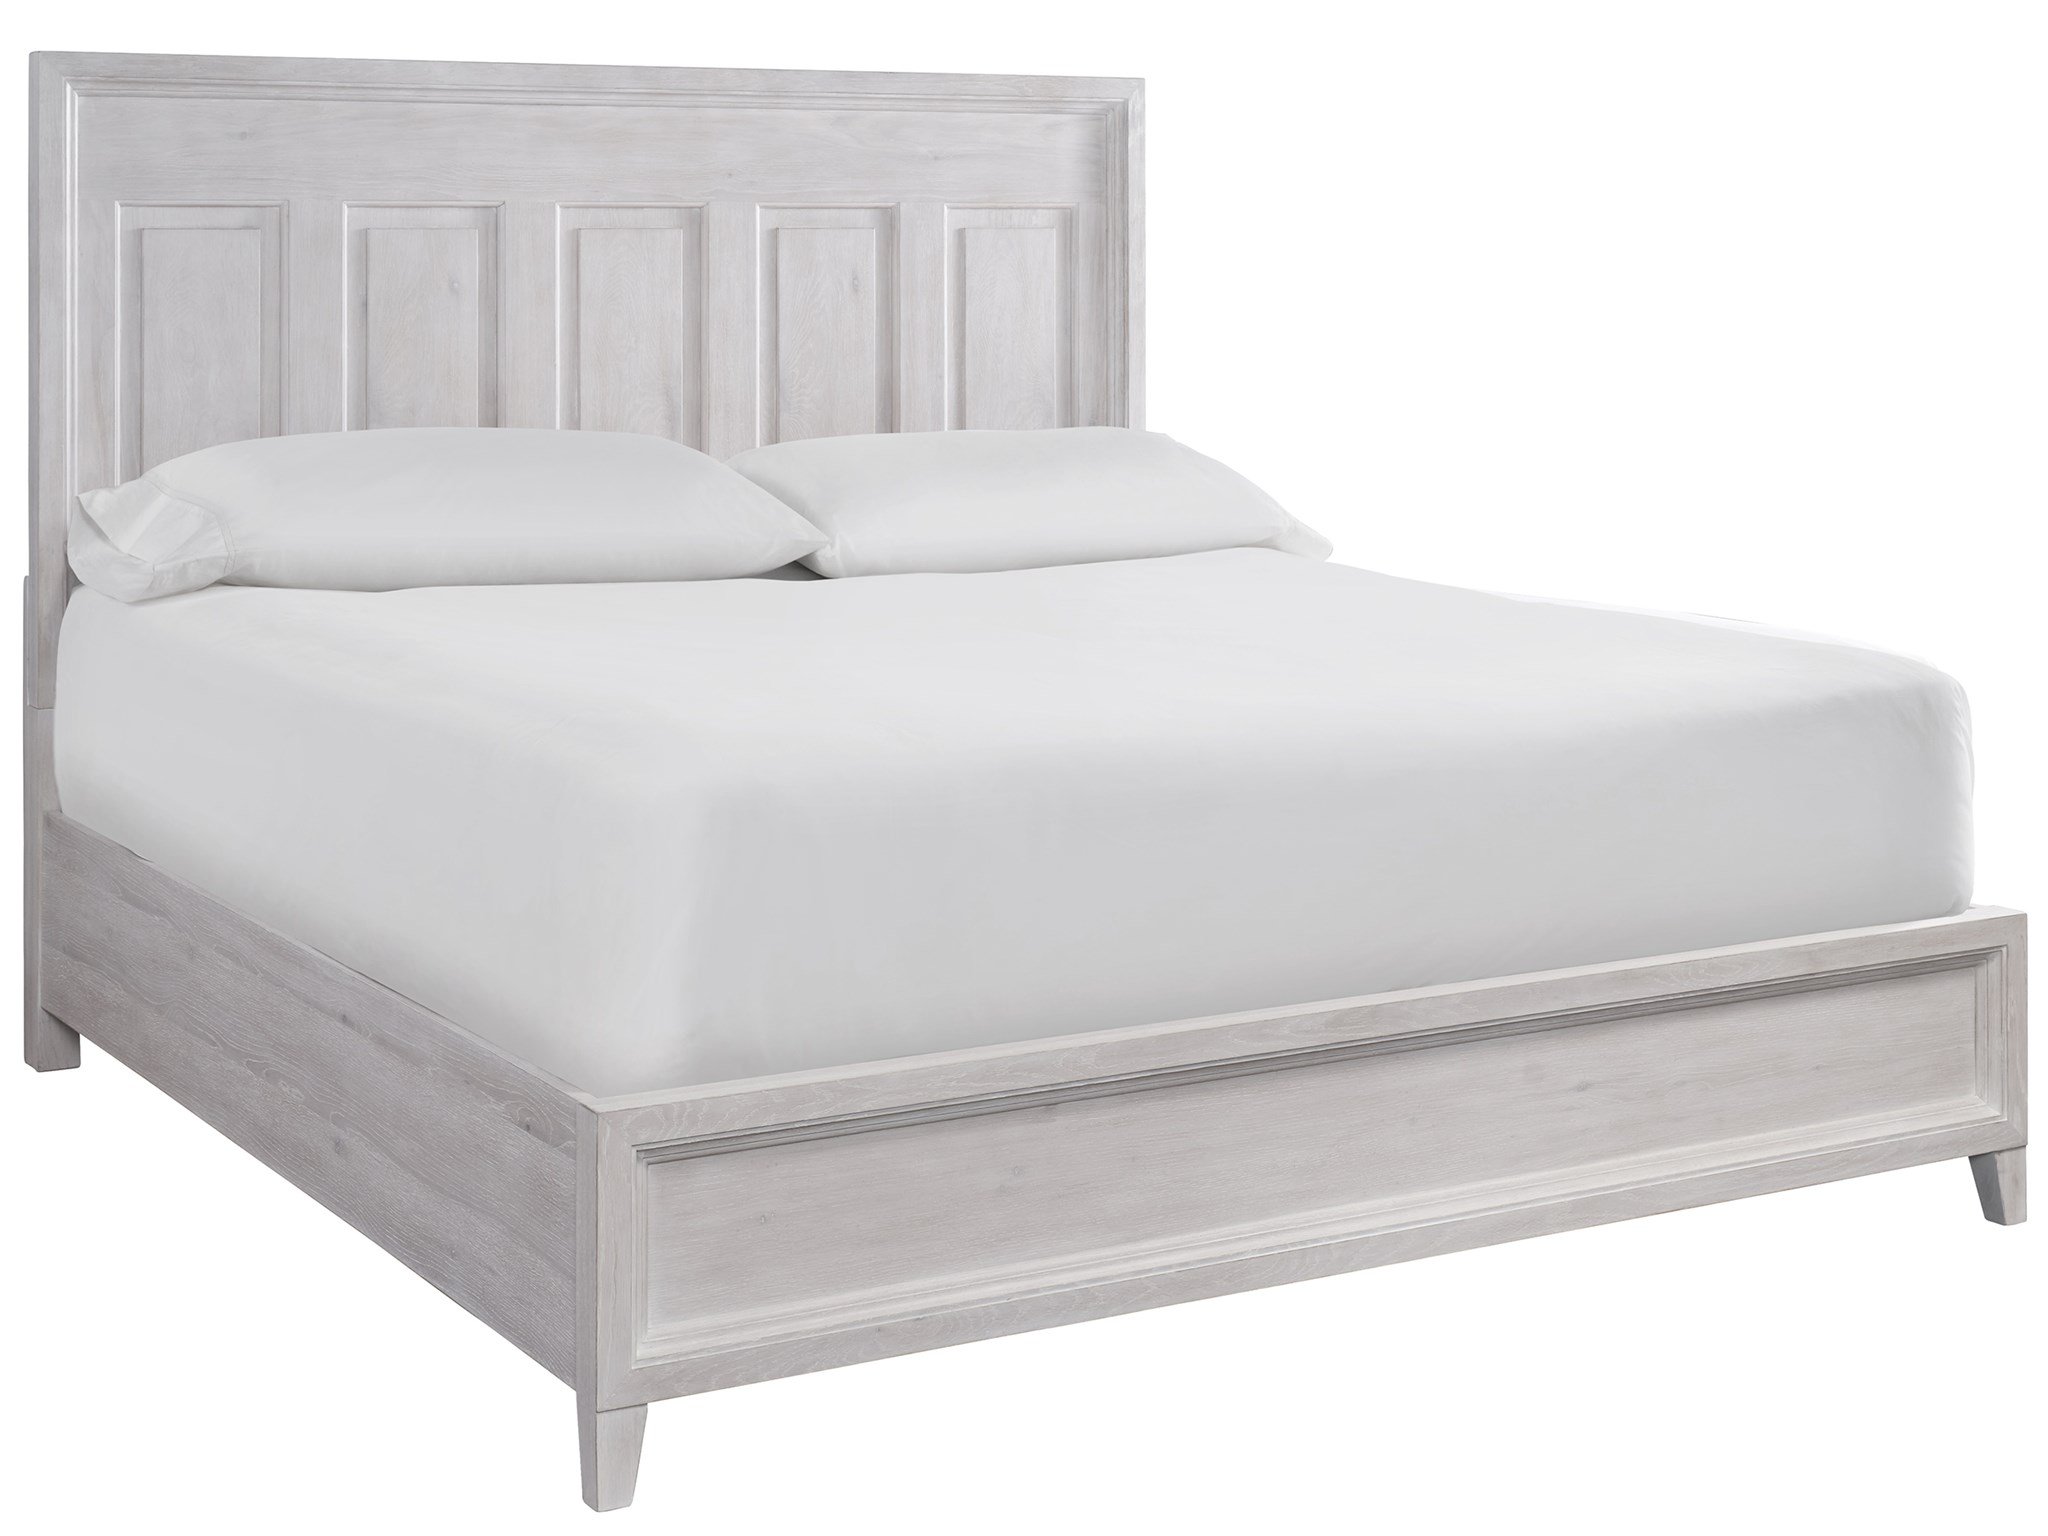 Haines King Bed